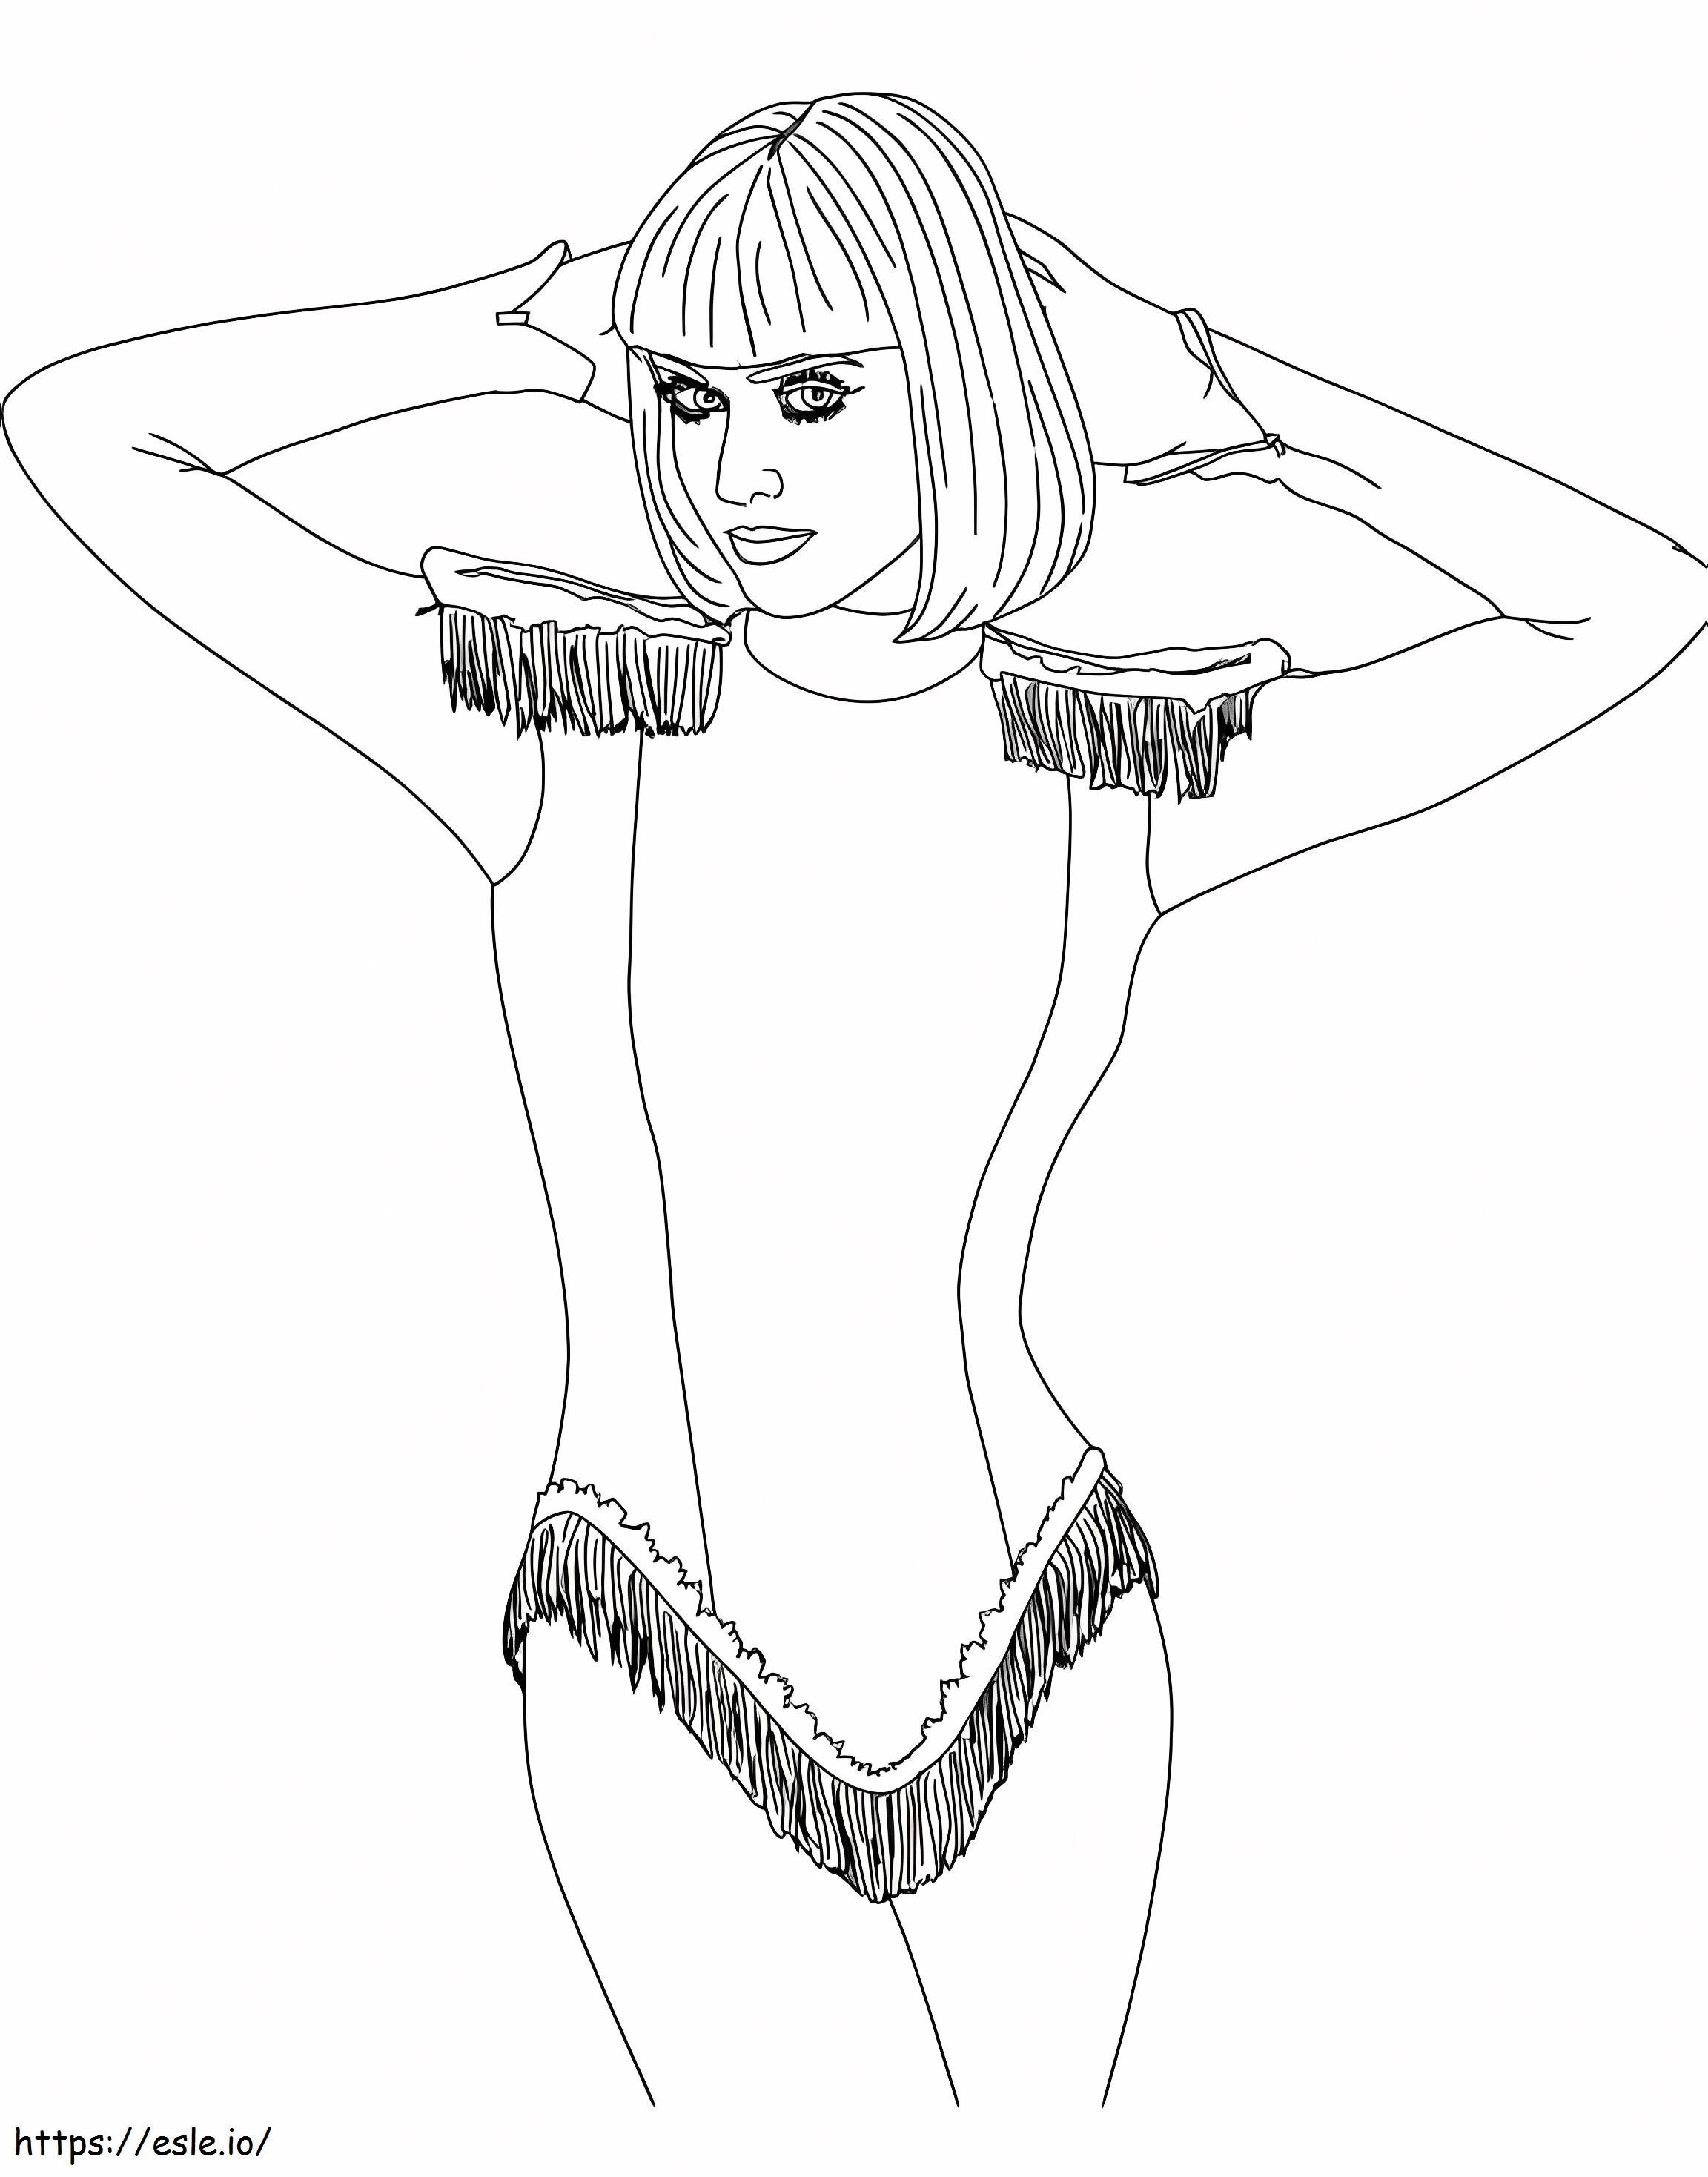 Wonderful Katy Perry coloring page